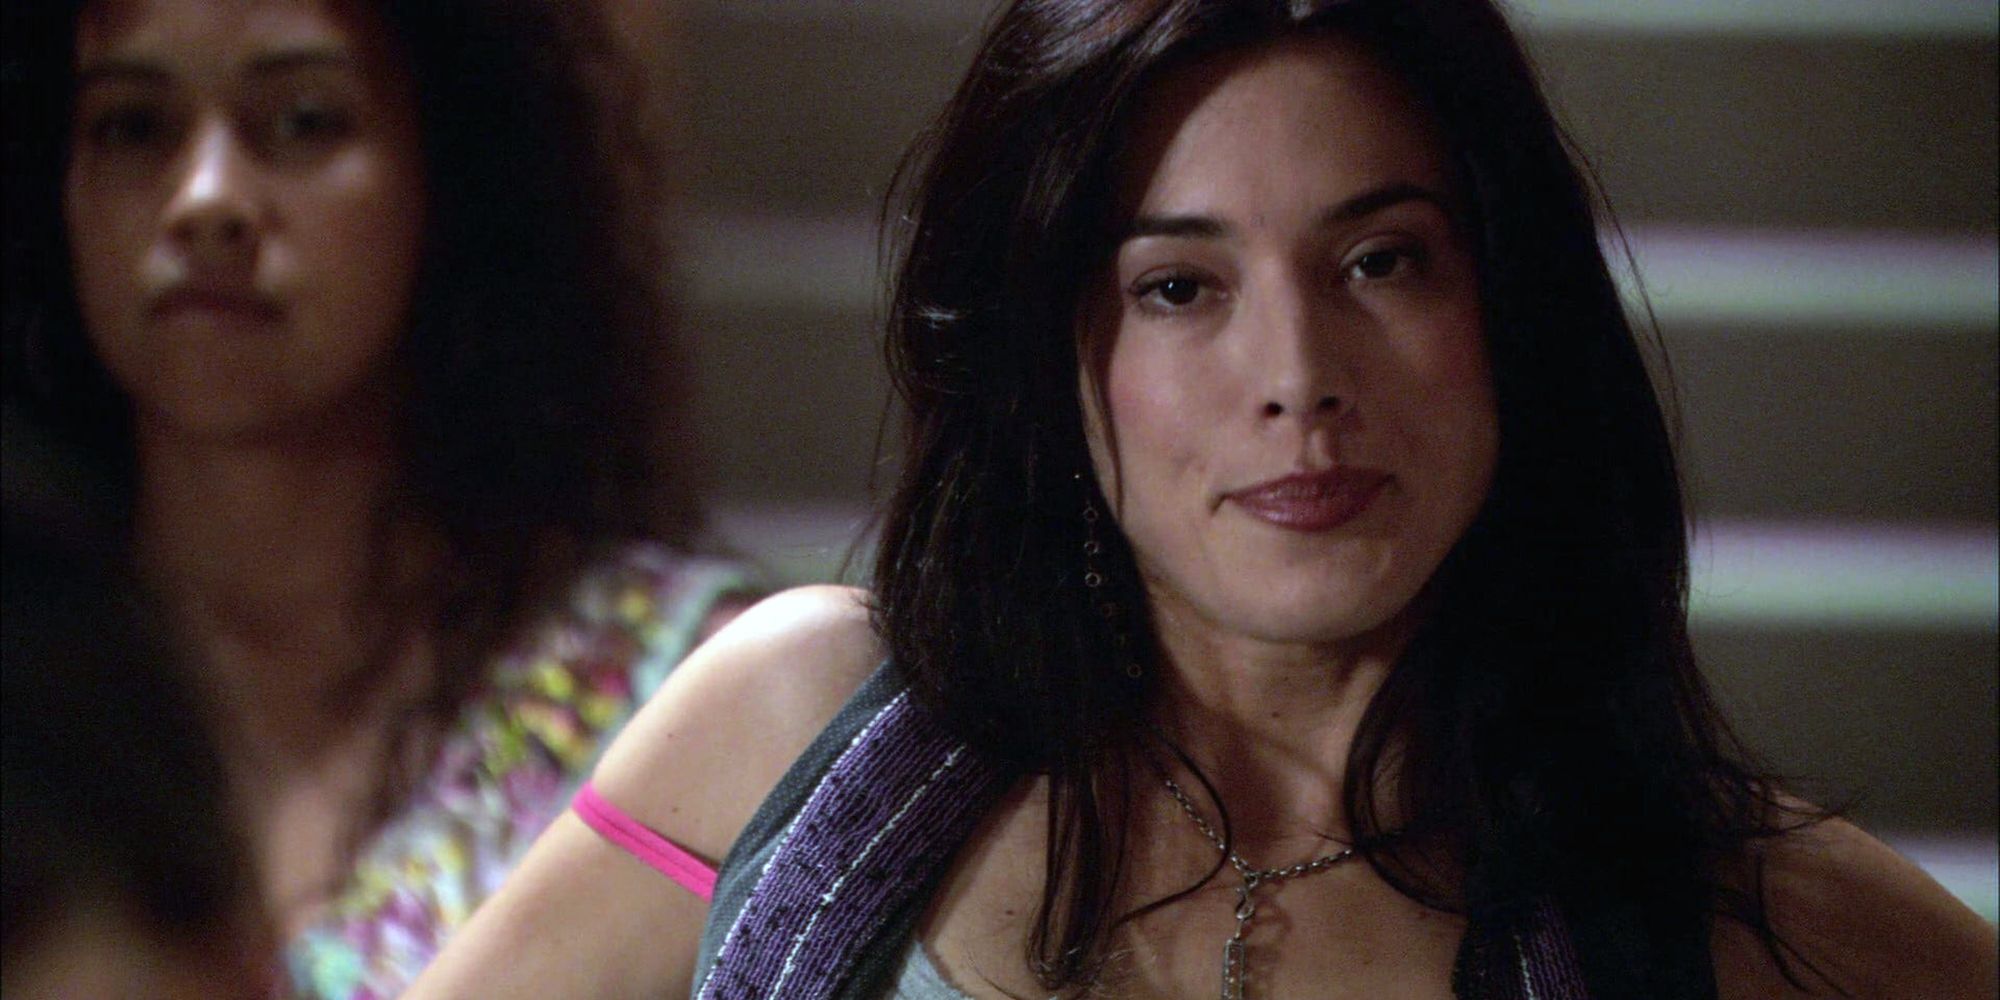 Lila West (Jaime Murray) was obsessed with Dexter (Michael C Hall), and ended up being killed by him in Paris